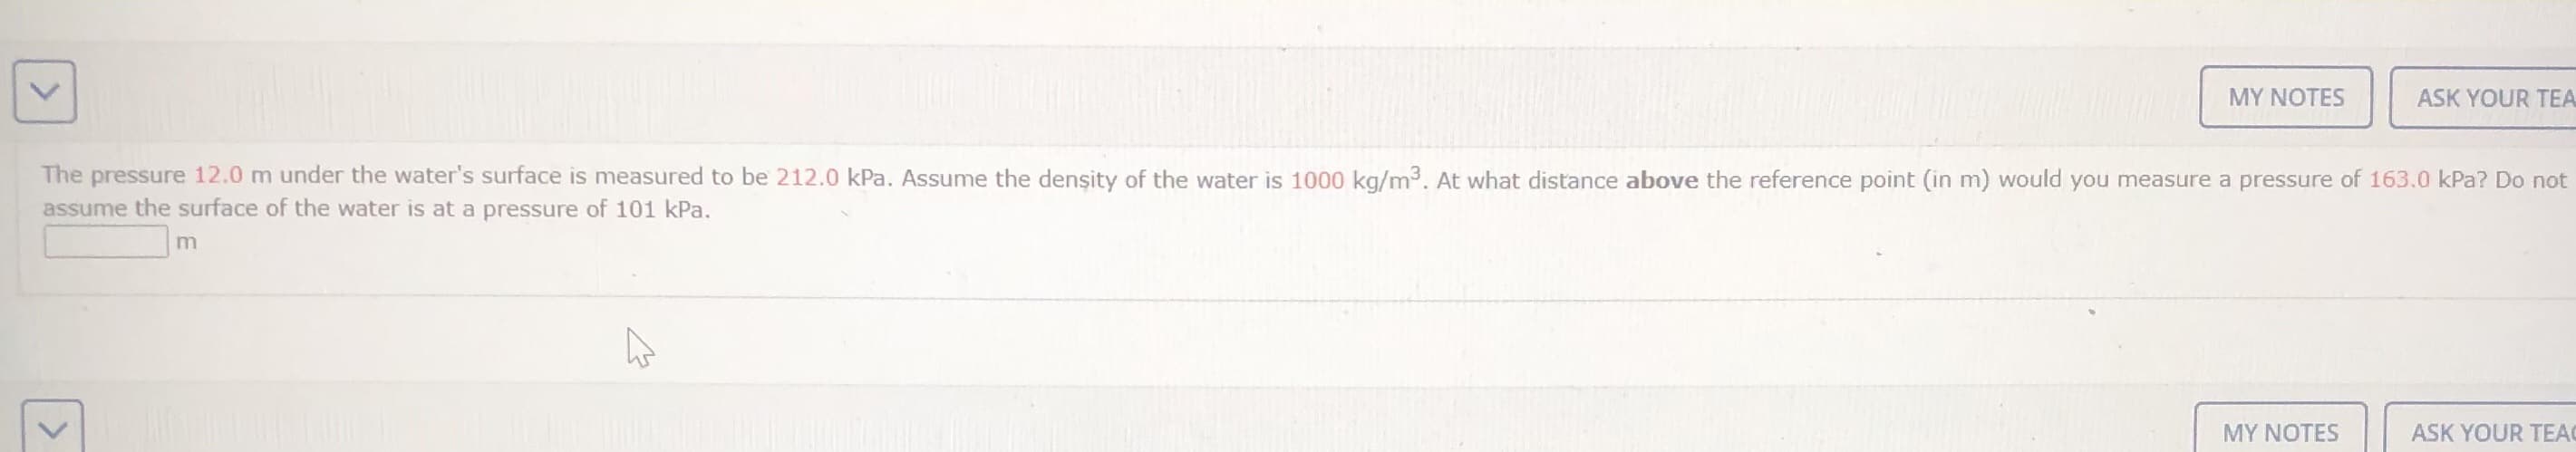 The pressure 12.0 m under the water's surface is measured to be 217.0 kPa, Asune the densty of the water is 1000 kg/m. At what distance above the reference port (in m) would you measure a pressure of 10J.0 ka? Do not
assune the surface of the water is at a pressure cf 101 kPa.
